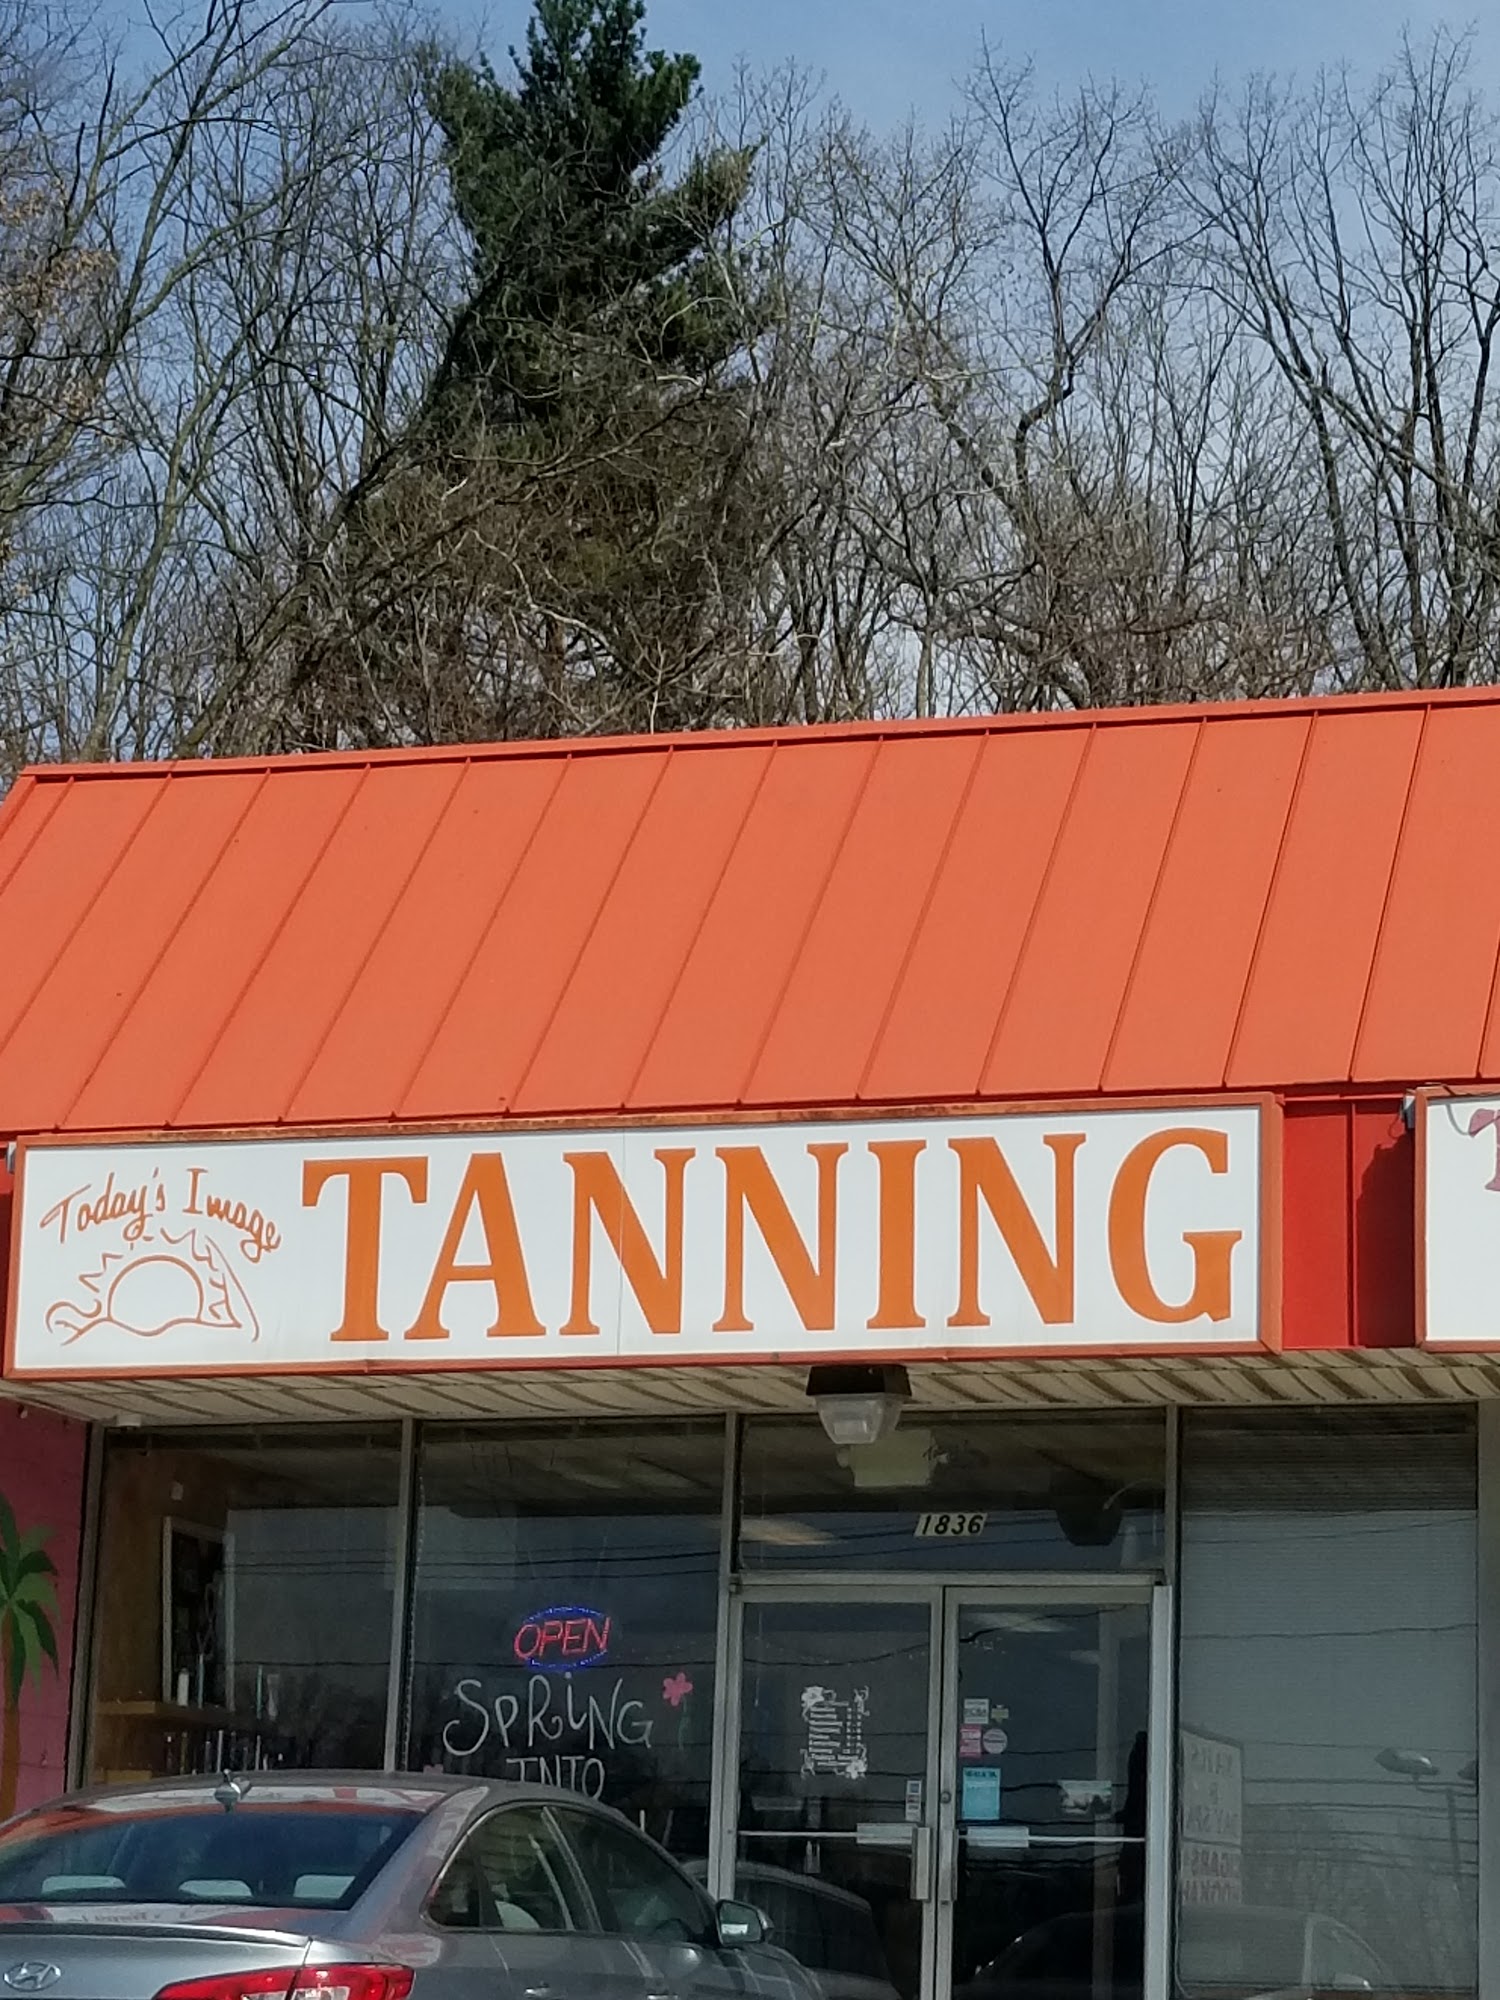 Today's Image Tanning